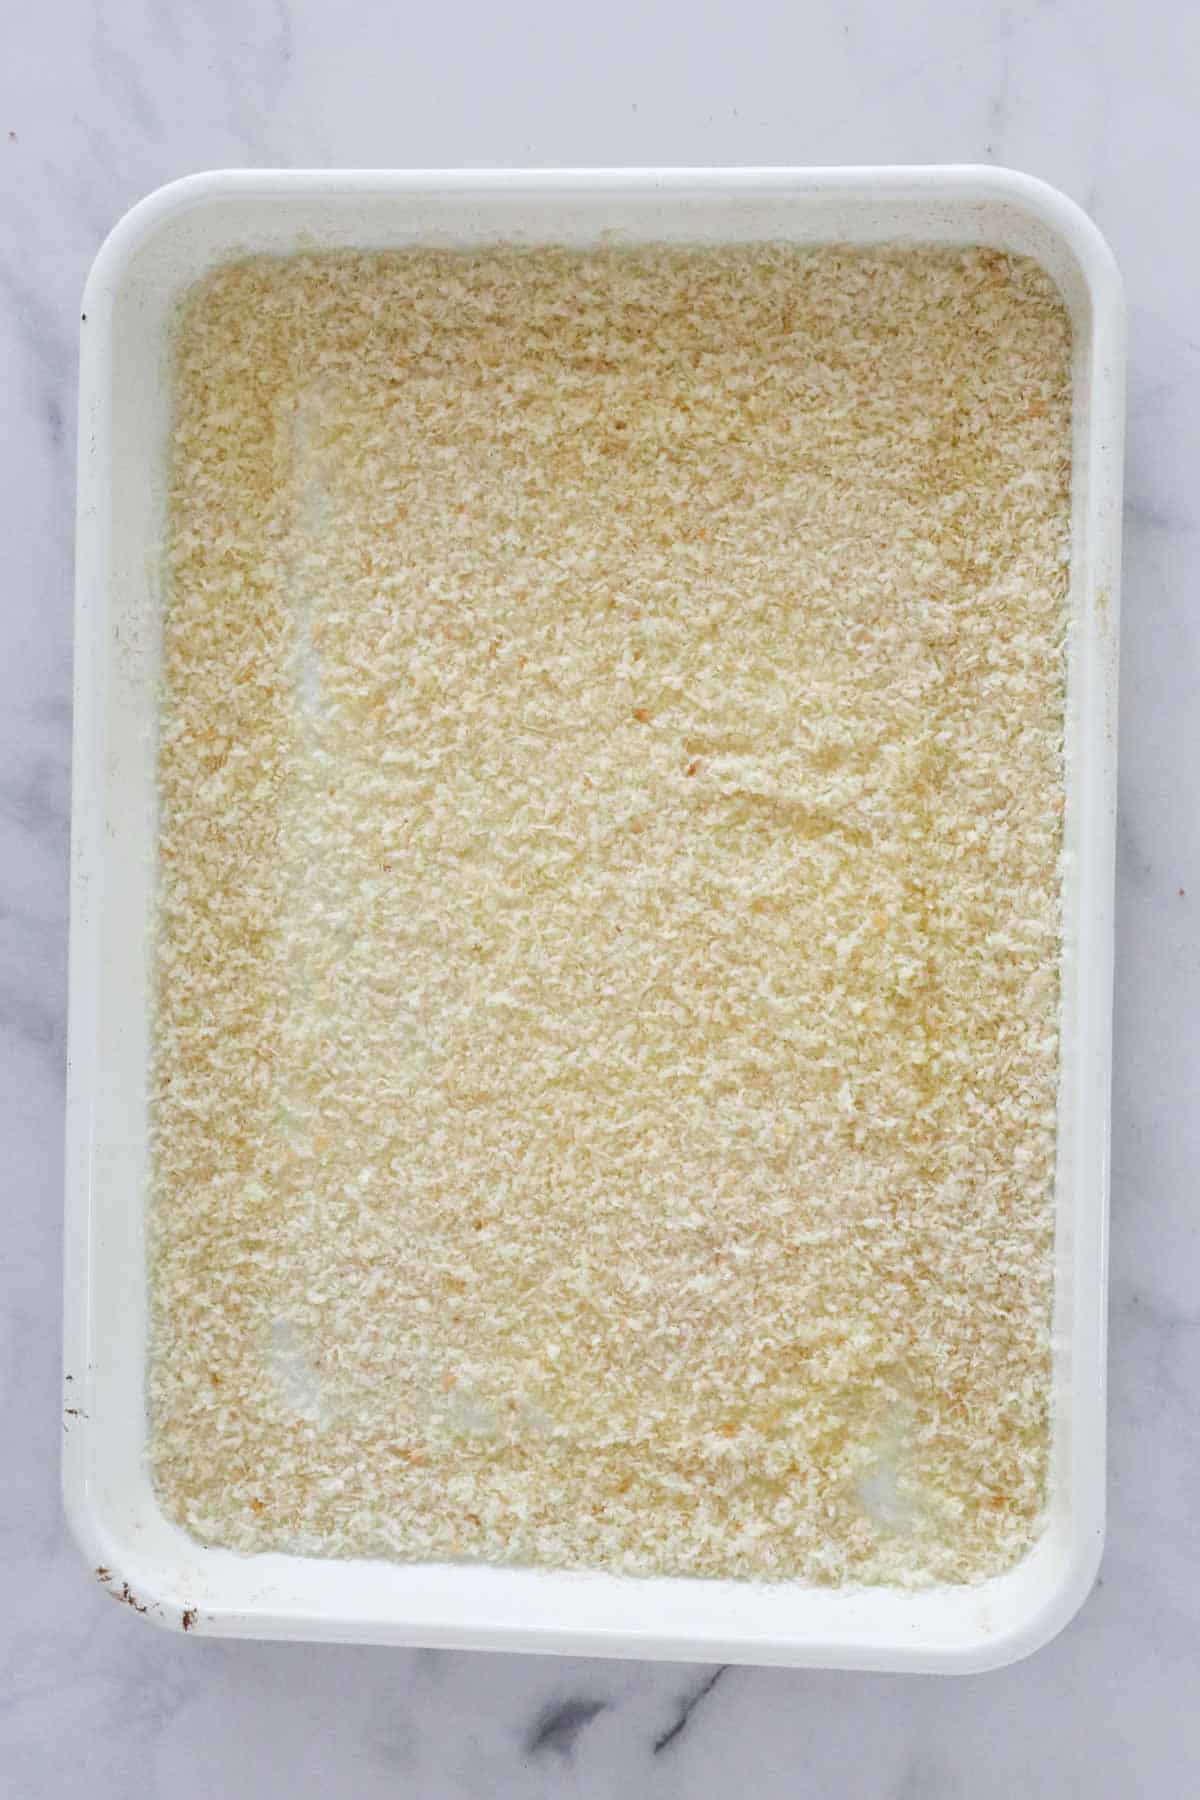 Panko crumbs spread out in a bakinng dish.